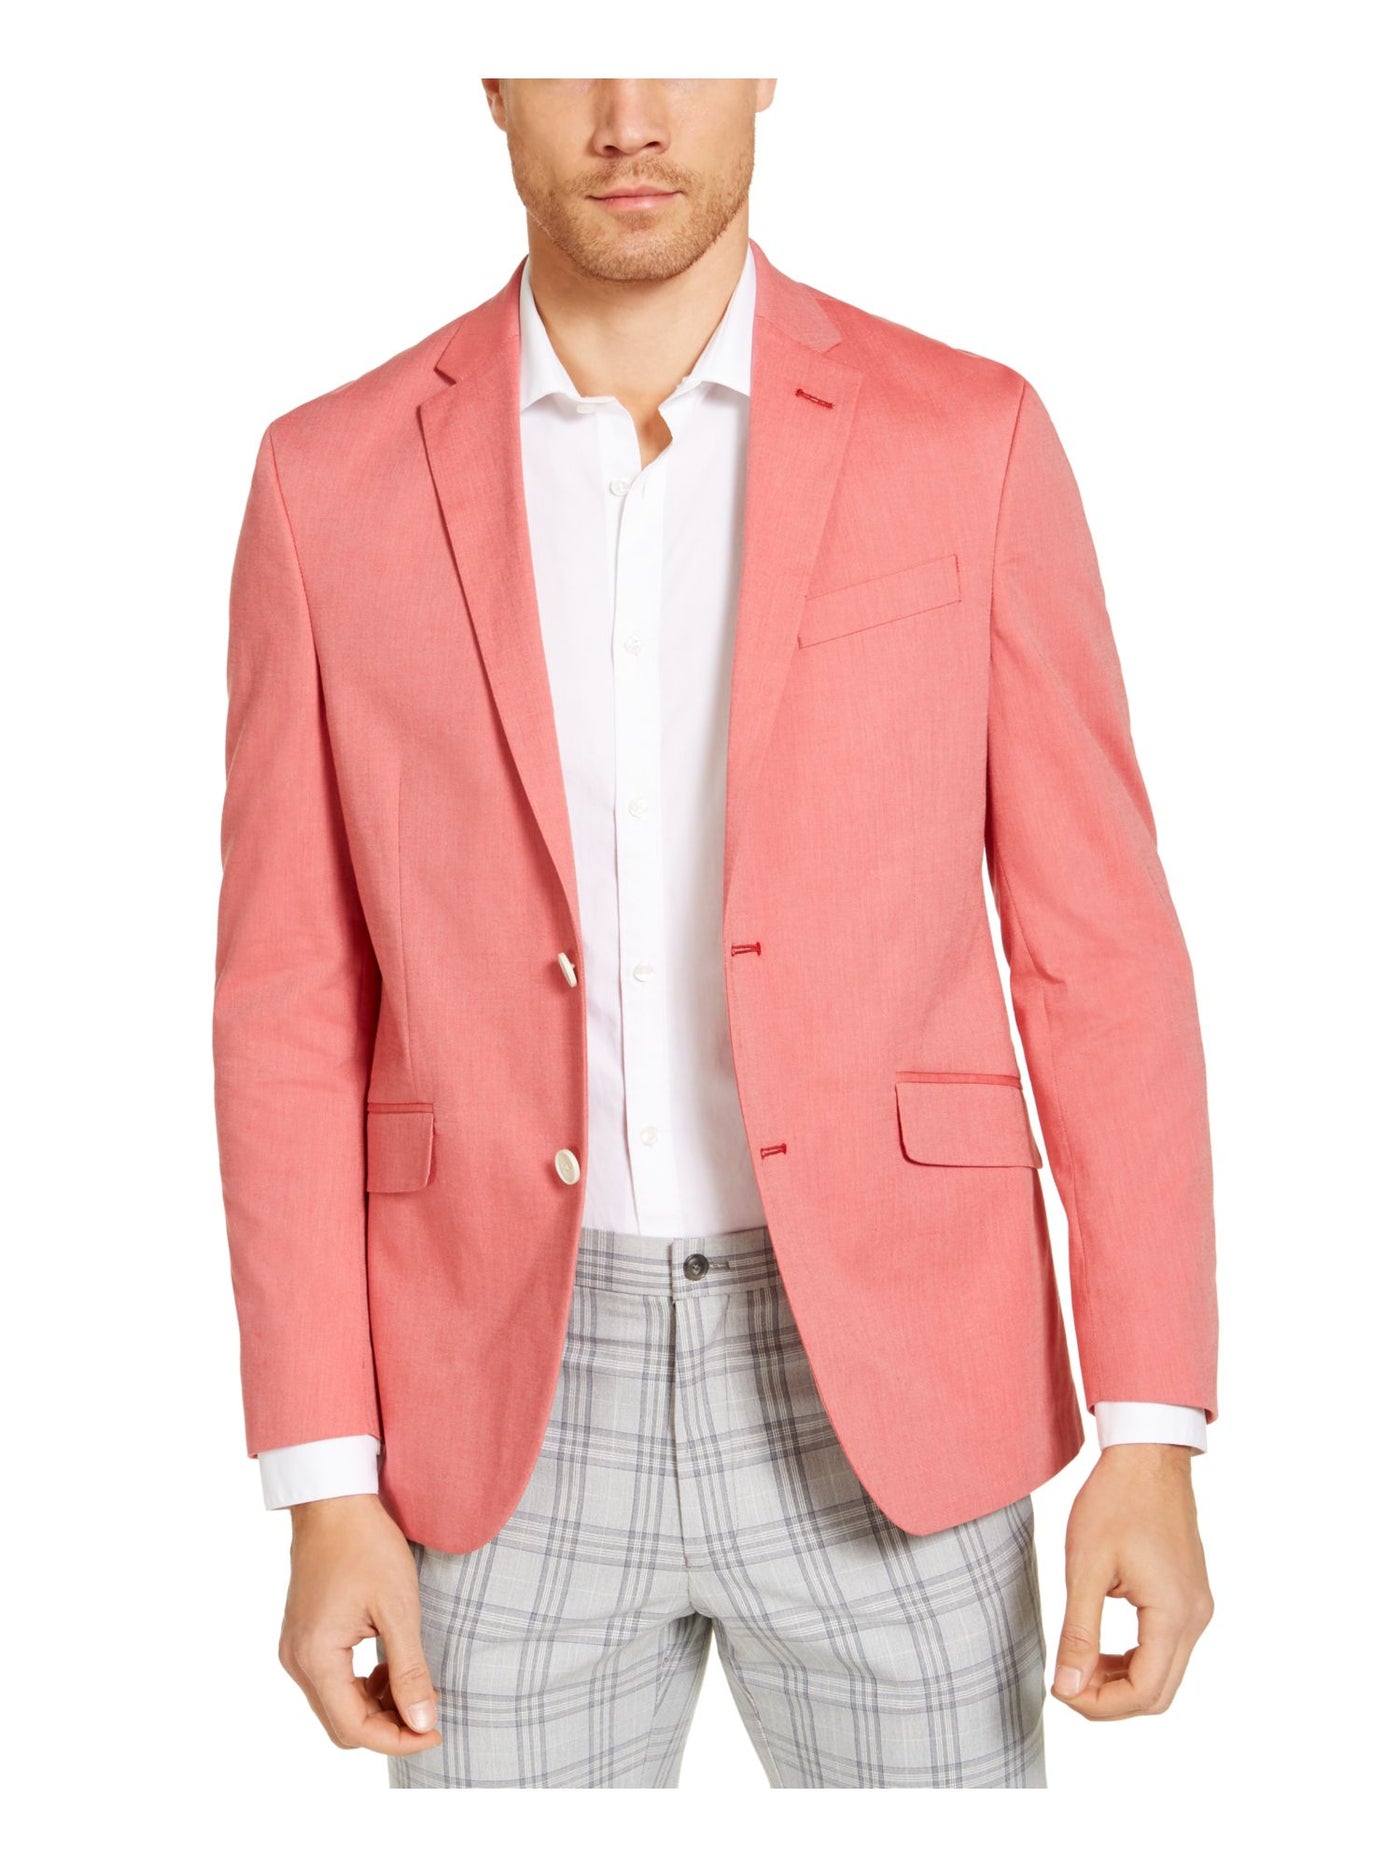 UNLISTED by KENNETH COLE Mens Coral Single Breasted, Slim Fit Chambray Blazer Sport Coat 42R